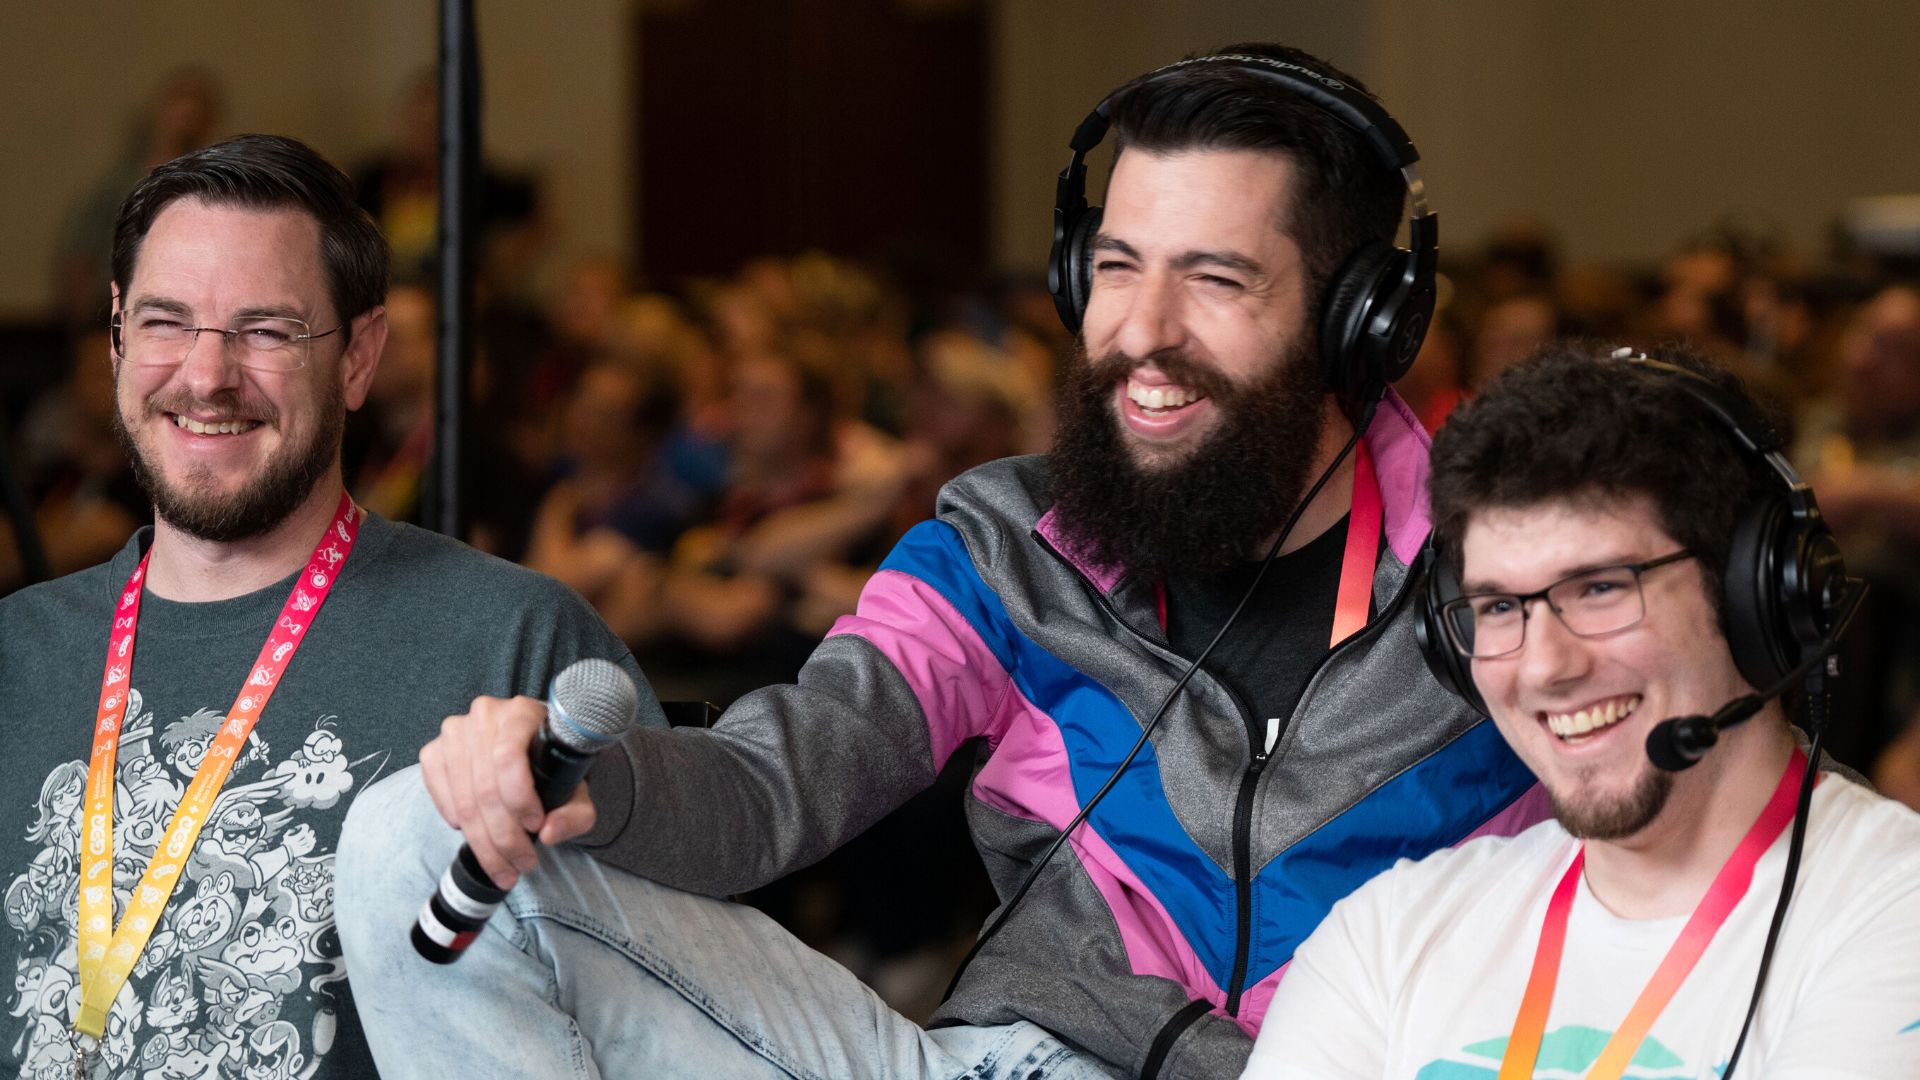 AGDQ 2023 will be online due to Florida’s LGBTQ+ and COVID-19 policies